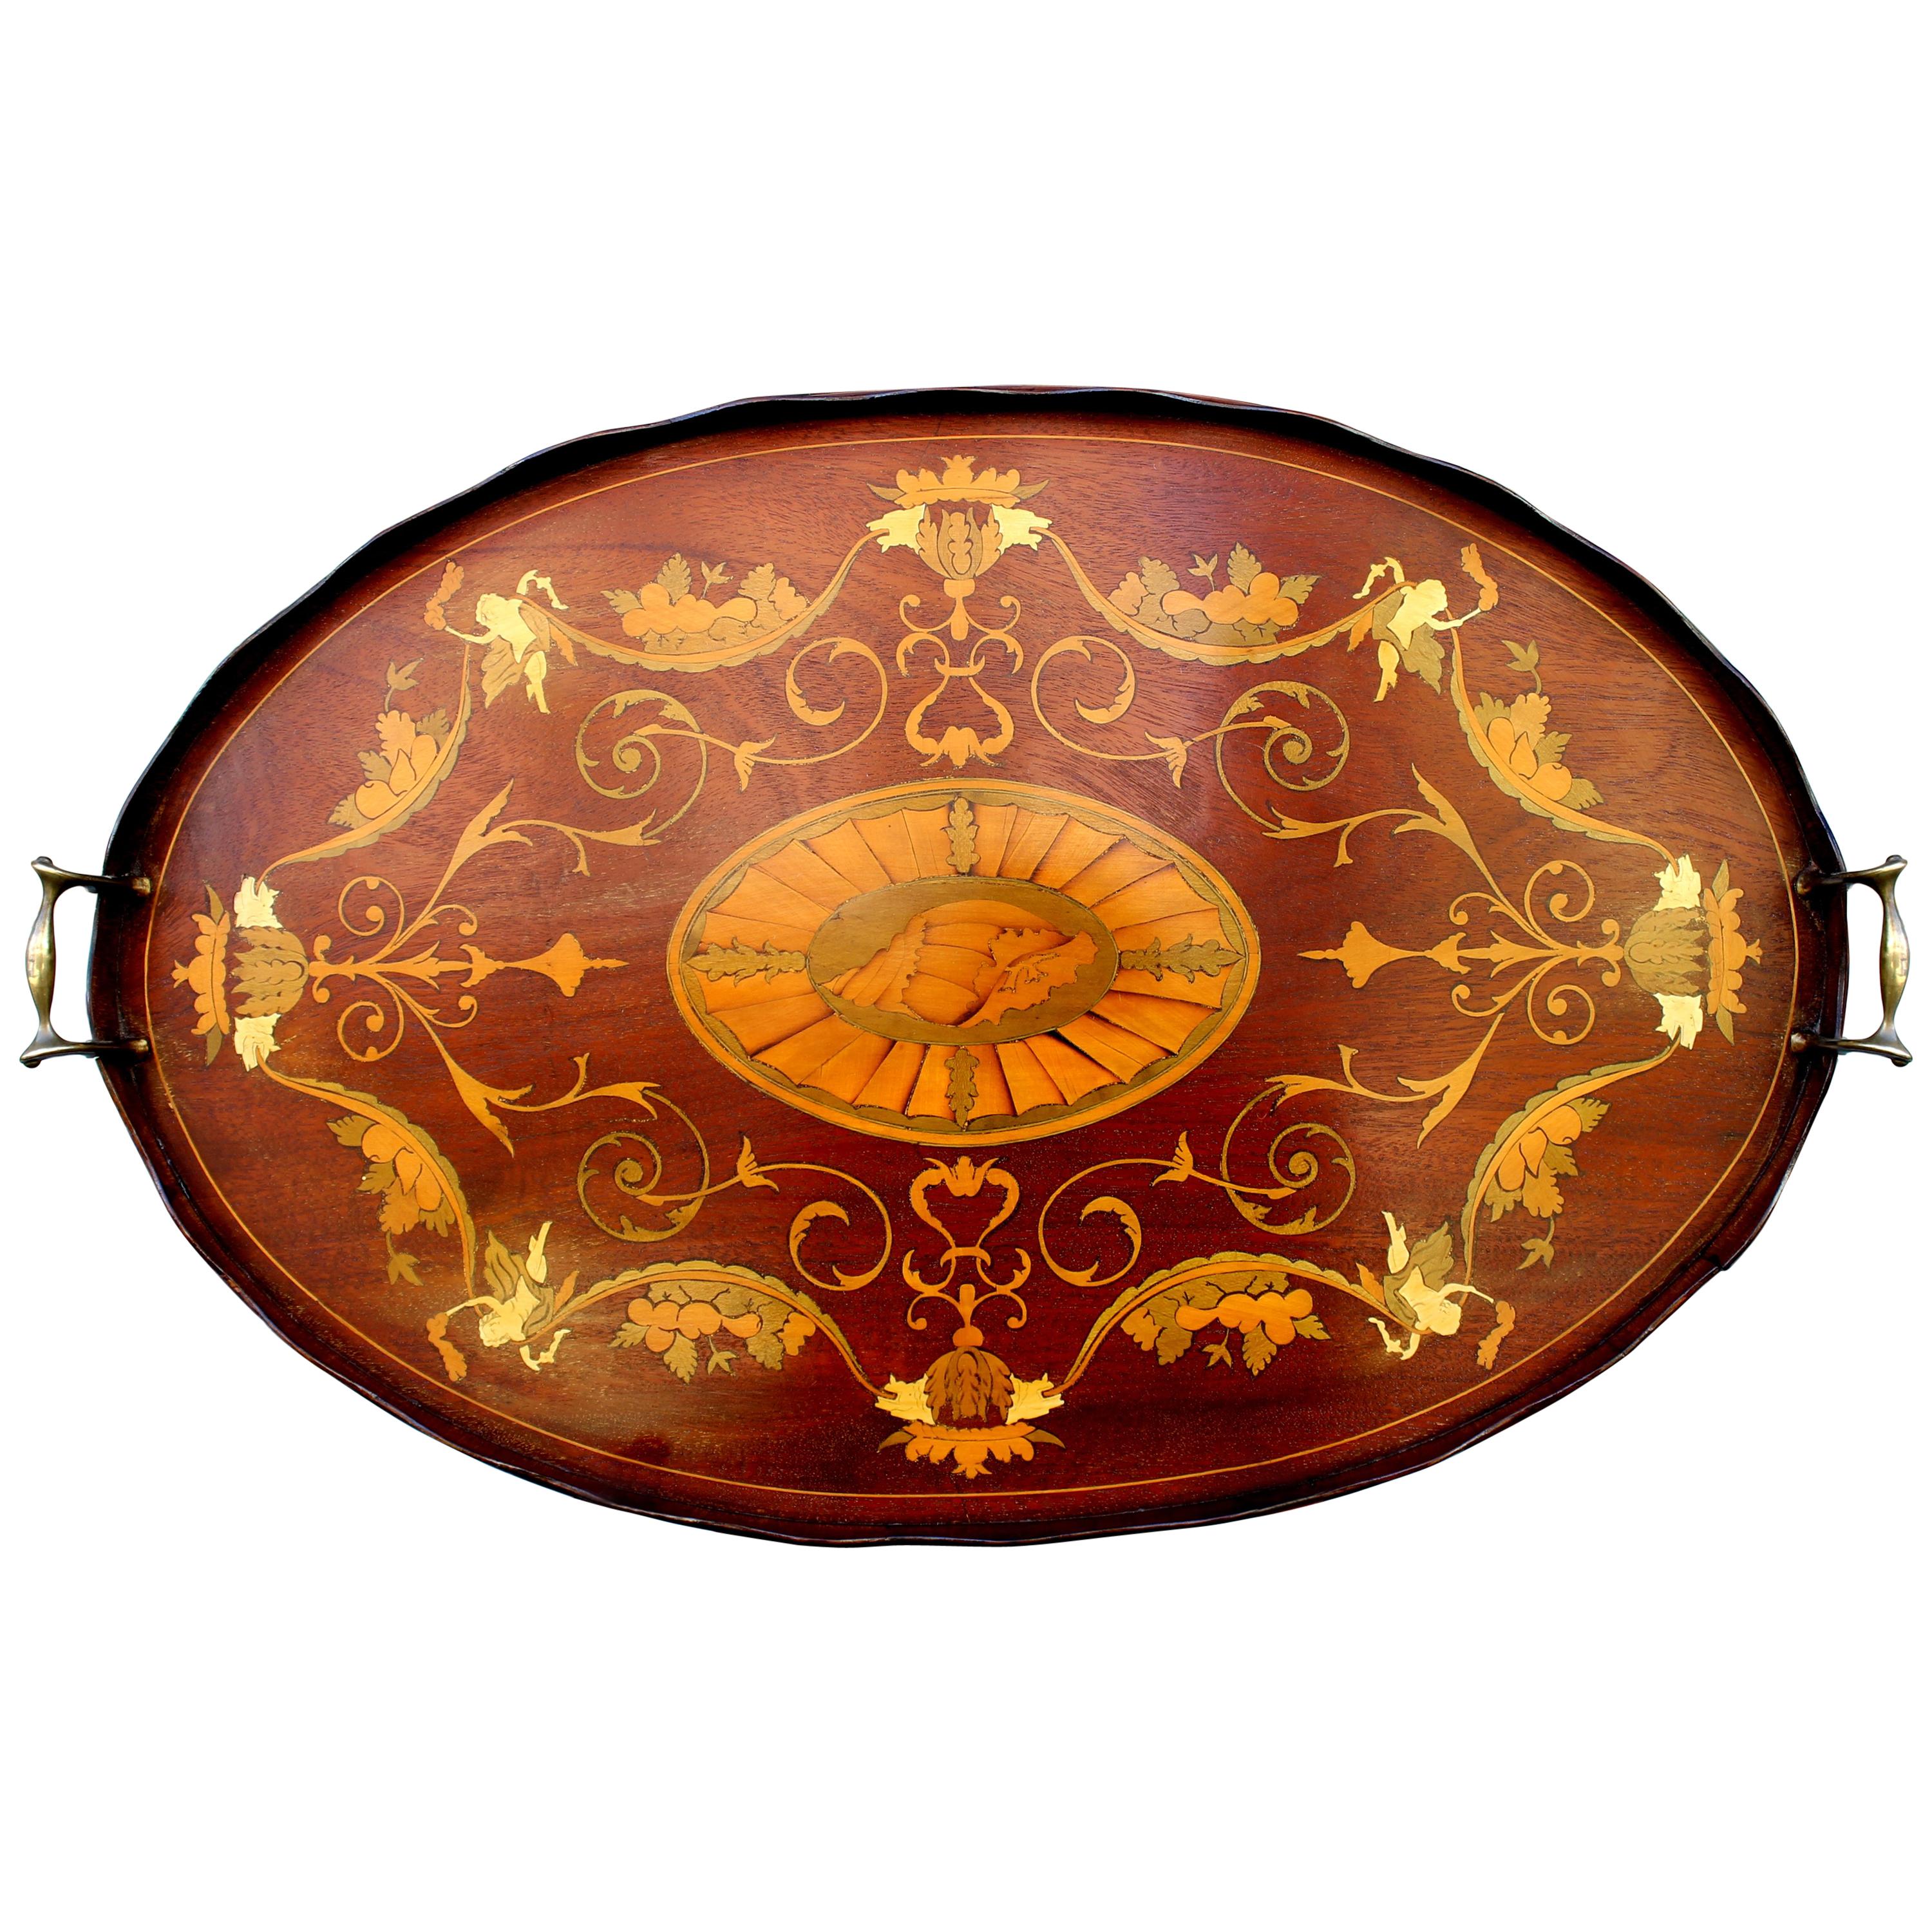 Finest Antique English Marquetry Inlaid Mahogany "Adam" Style Tray